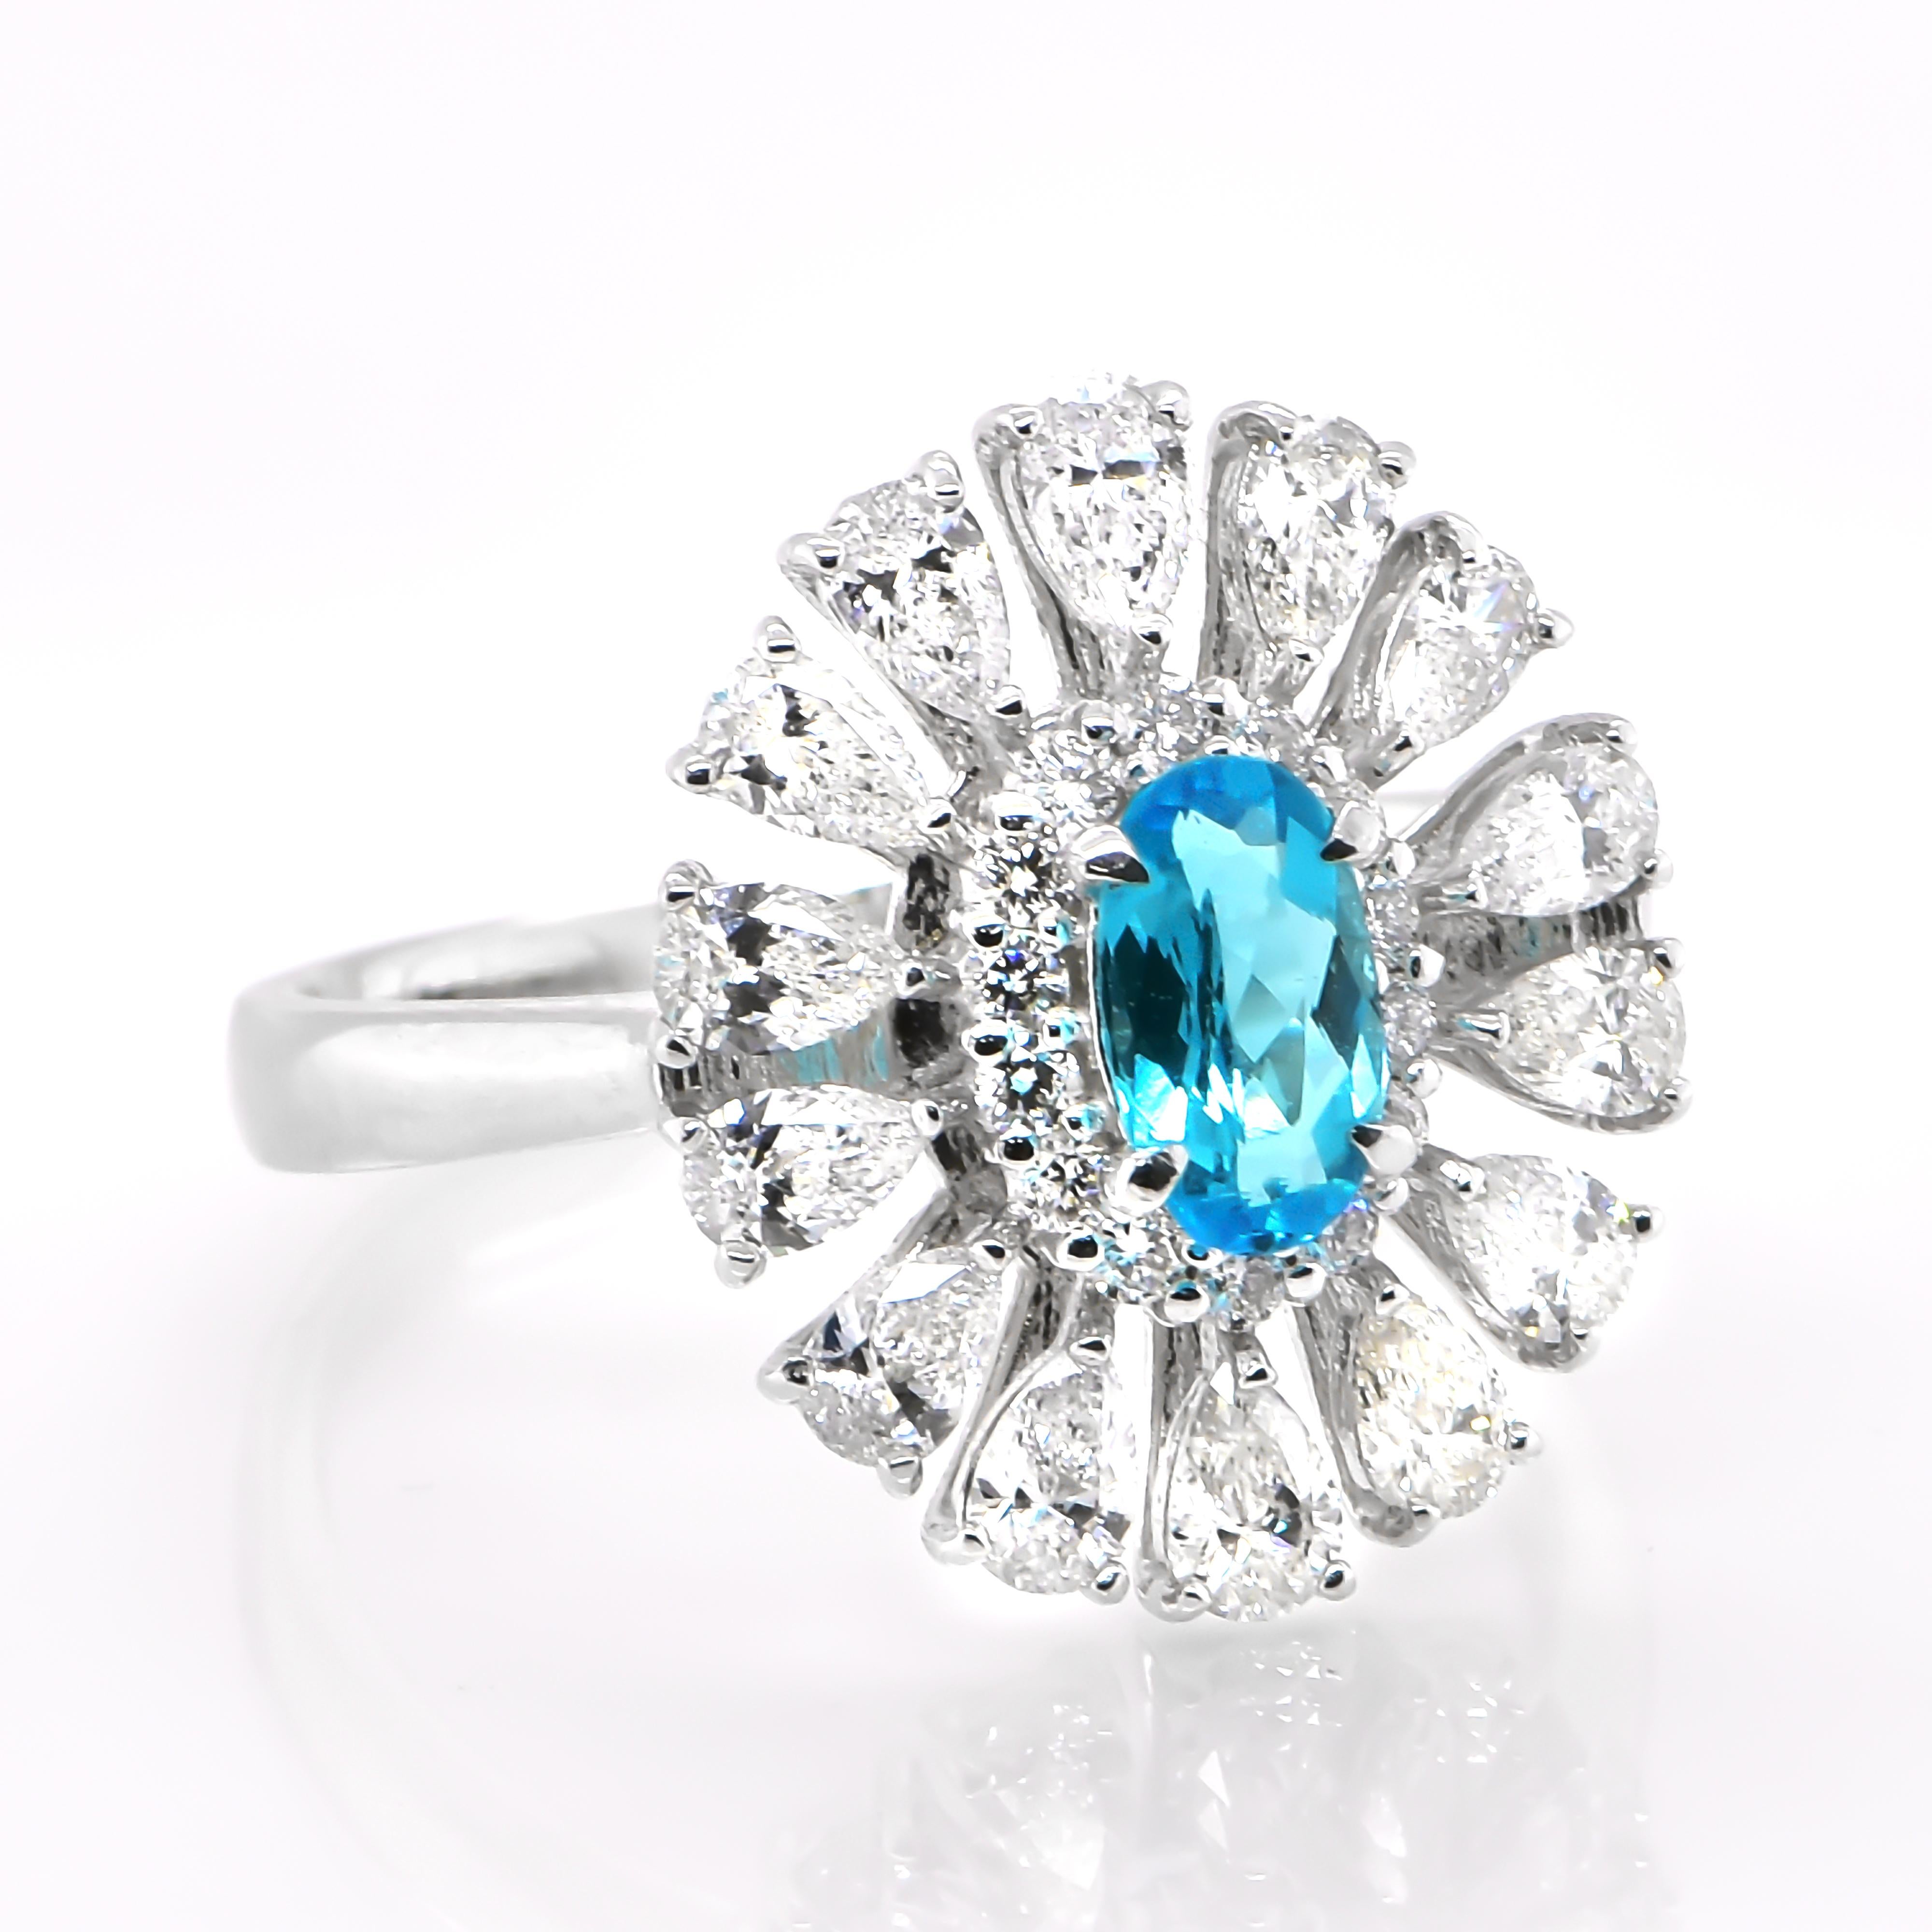 A beautiful ring featuring a GIA Certified 0.49 Carat Natural Brazilian Paraiba Tourmaline and 1.16 Carats of Diamond Accents set in Platinum. Paraiba Tourmalines were only discovered 30 years ago in the Brazilian state of the same name- Paraiba.